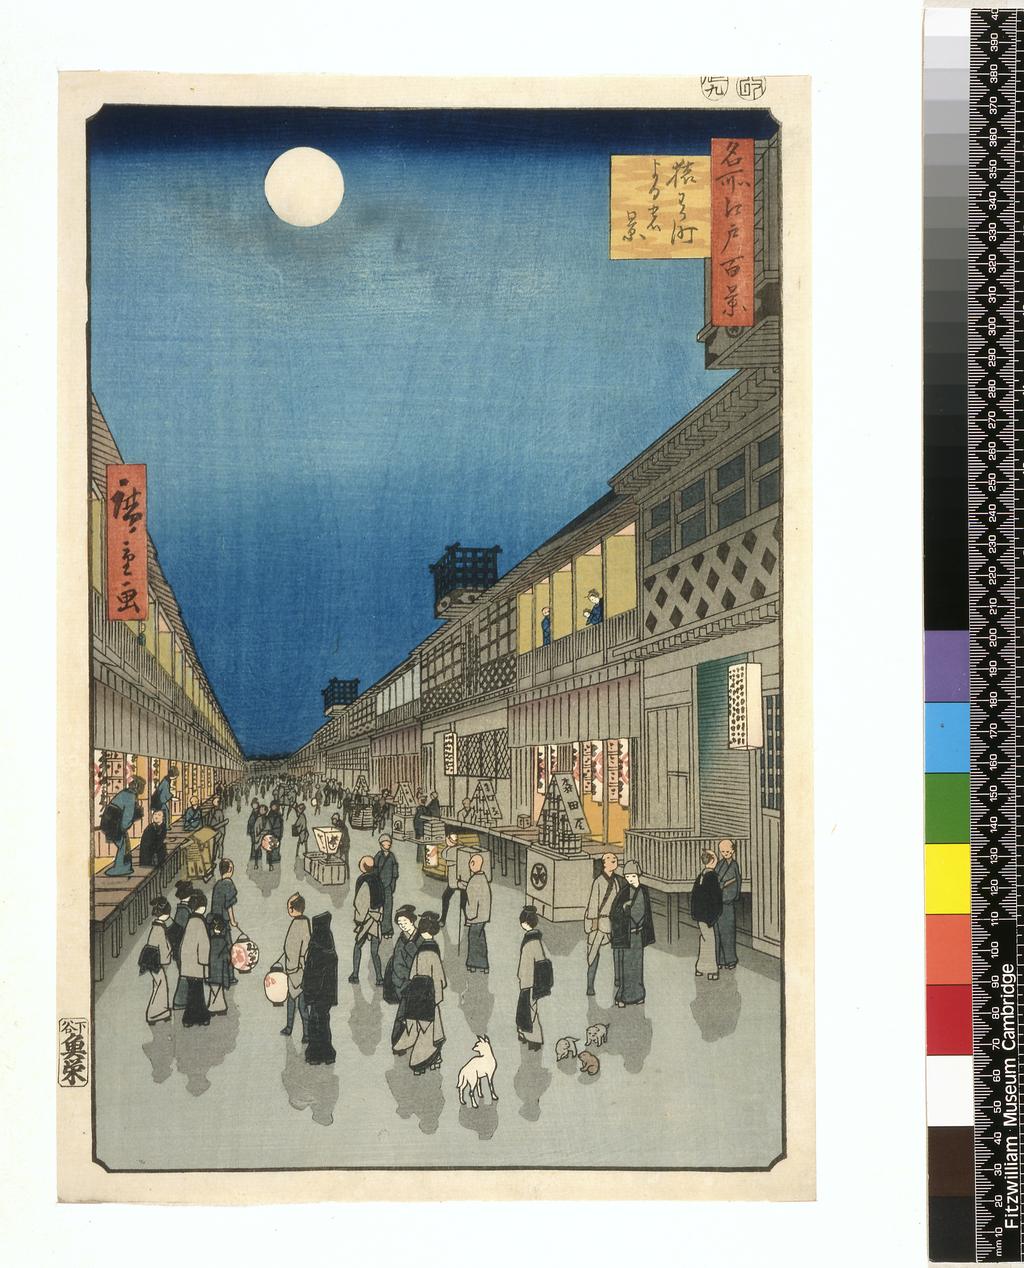 An image of Saruwaka-machi yoru no kei. Hiroshige, Utagawa (Japanese, 1797-1858). Colour print from woodblocks. Ôban. Signed: Hiroshige ga. Publisher: Uoei (Uoya Eikichi). Date seal: Dragon 9 (9/1856). Censor’s seal: aratame. 1856. Ukiyo-e. Notes: No. 90 from the series Meisho Edo hyakkei (One hundred famous views of Edo), in the section for Autumn. Saruwaka-machi in Asakusa was named after the founder of Edo kabuki theatre, Saruwaka Kanzaburô. The officially approved kabuki and puppet theatres were relocated here after a fire destroyed the old theatre districts in 1841. Theatres and teahouses lined the street and an entrance gate stood at the south (far) end. The east (left) side is seen to be dominated by teahouses; waitresses appear on the verandah and men with lanterns escort the departing guests. On the other side the three main kabuki theatres are identified by a boxed turret on the roof. The Morita-za (near right) had only recently reopened in the spring of 1856. The view shows the full moon of the eighth month, with the theatres closed before the new season opened in the ninth month. The depiction of shadows derives from the introduction of Western pictorial ideas into Japan.